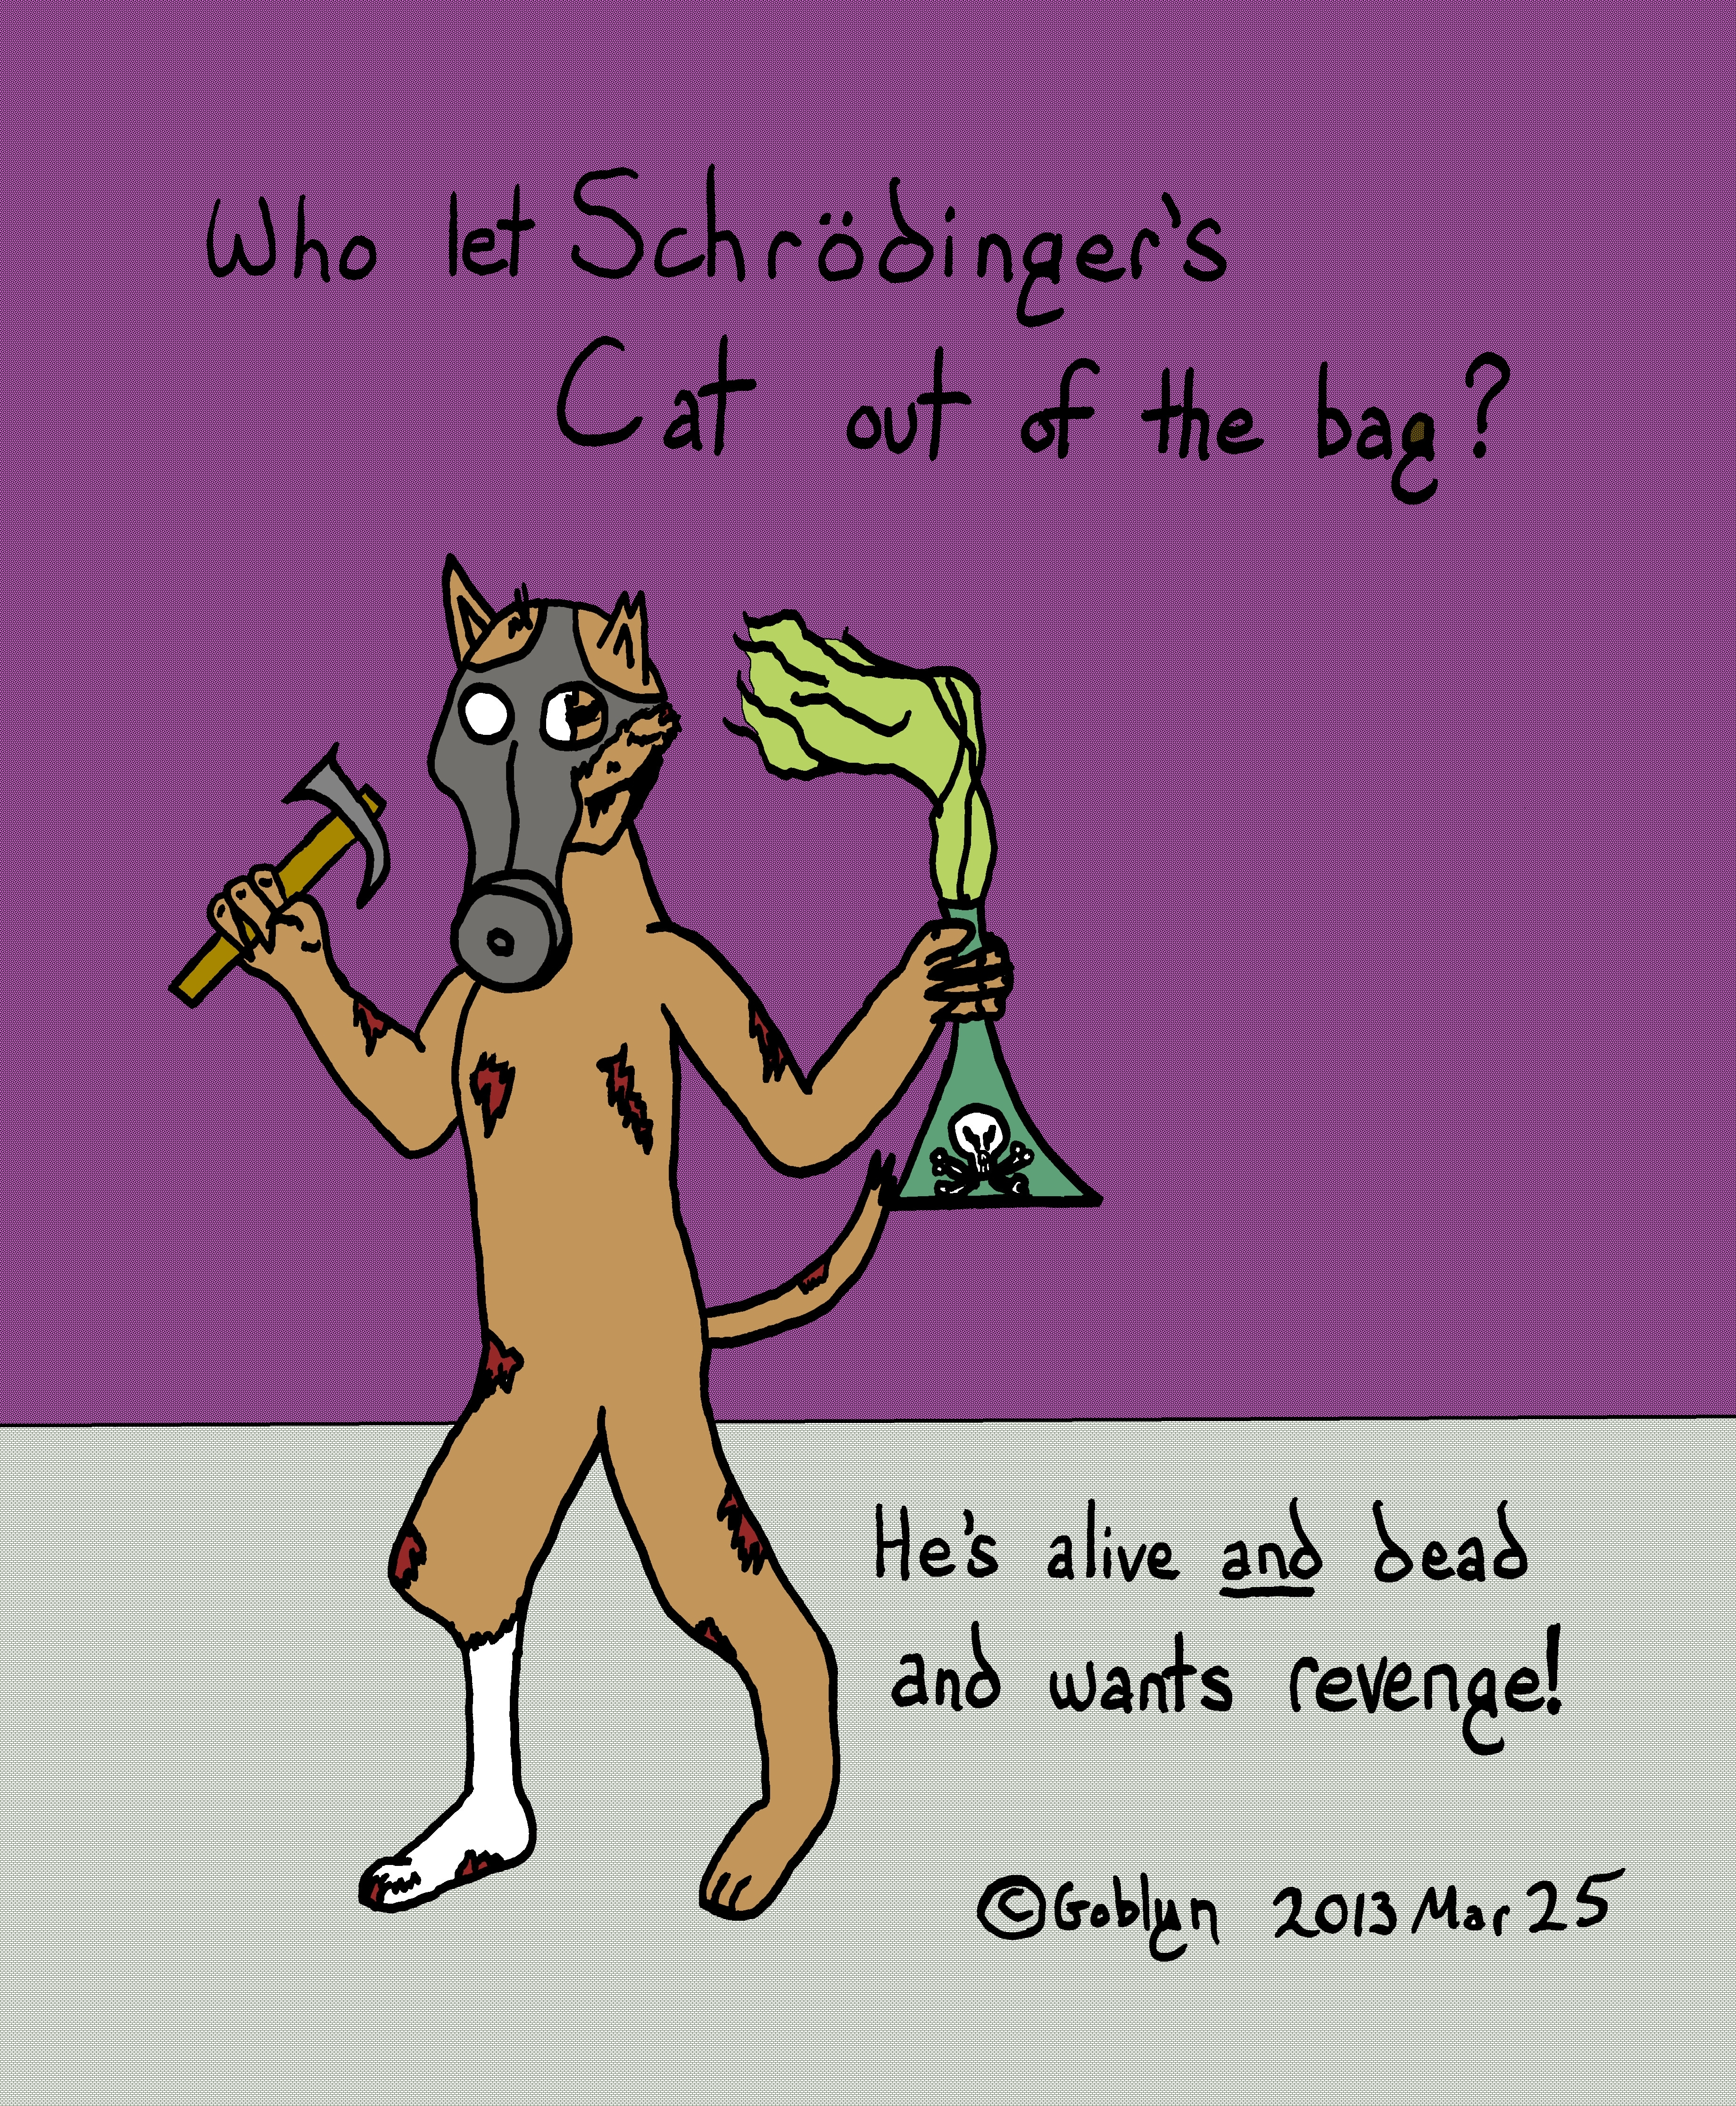 Schrodinger's Cat - He's Alive and Dead